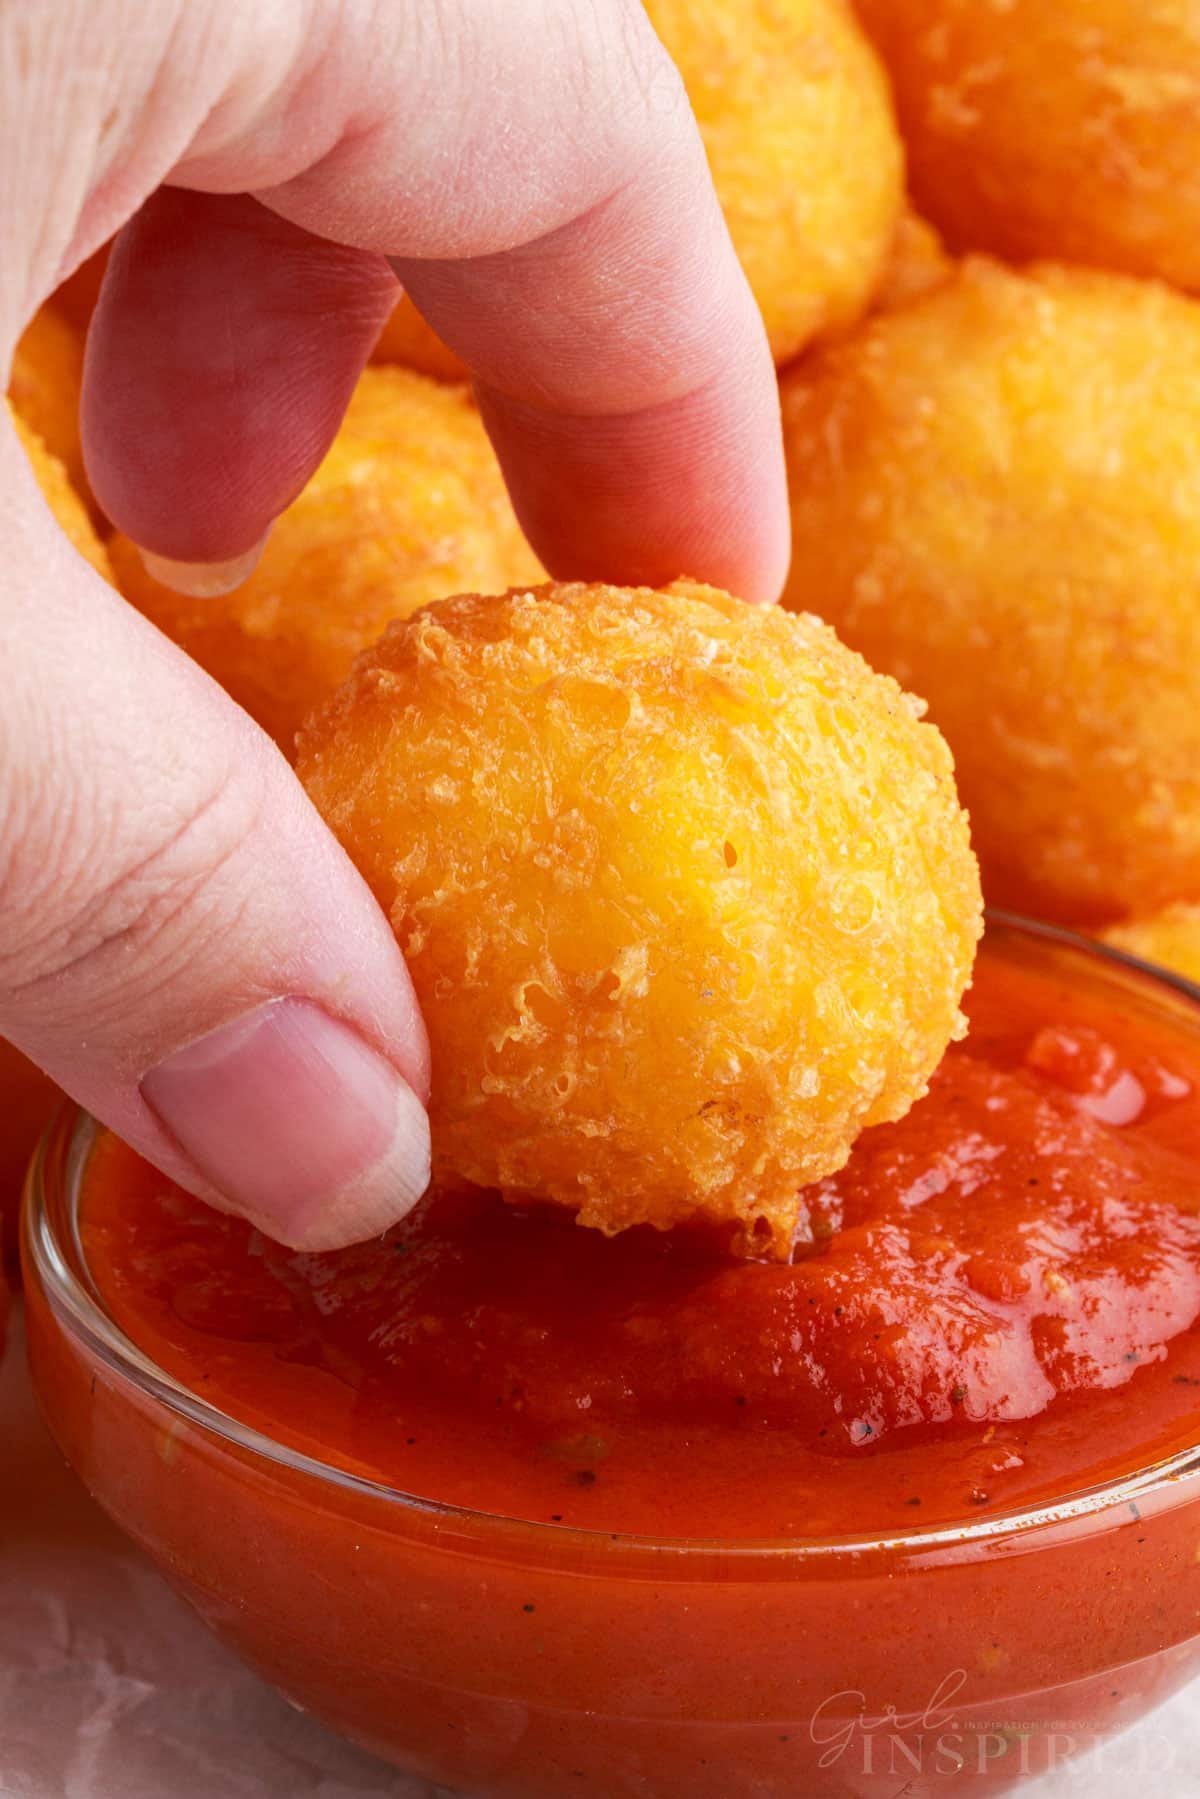 A Fried Cheese Ball being dipped in sauce.